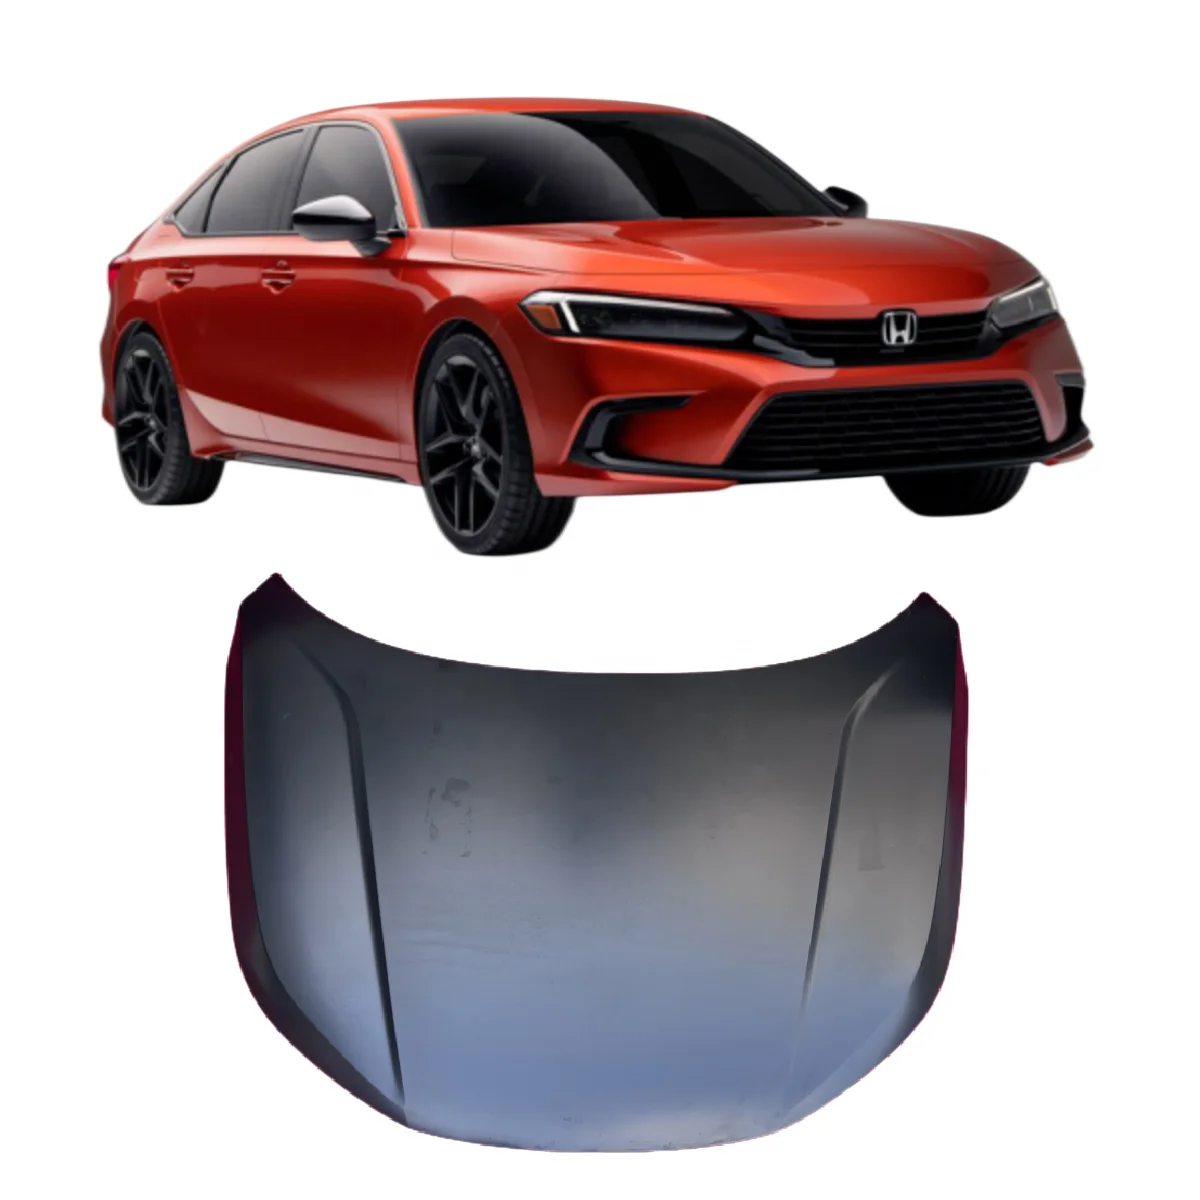 

Replacements for Hon-da CI-VIC 2022 car exterior auto body pars automotive 660100-T20-H00ZZ engineer covers car hoods